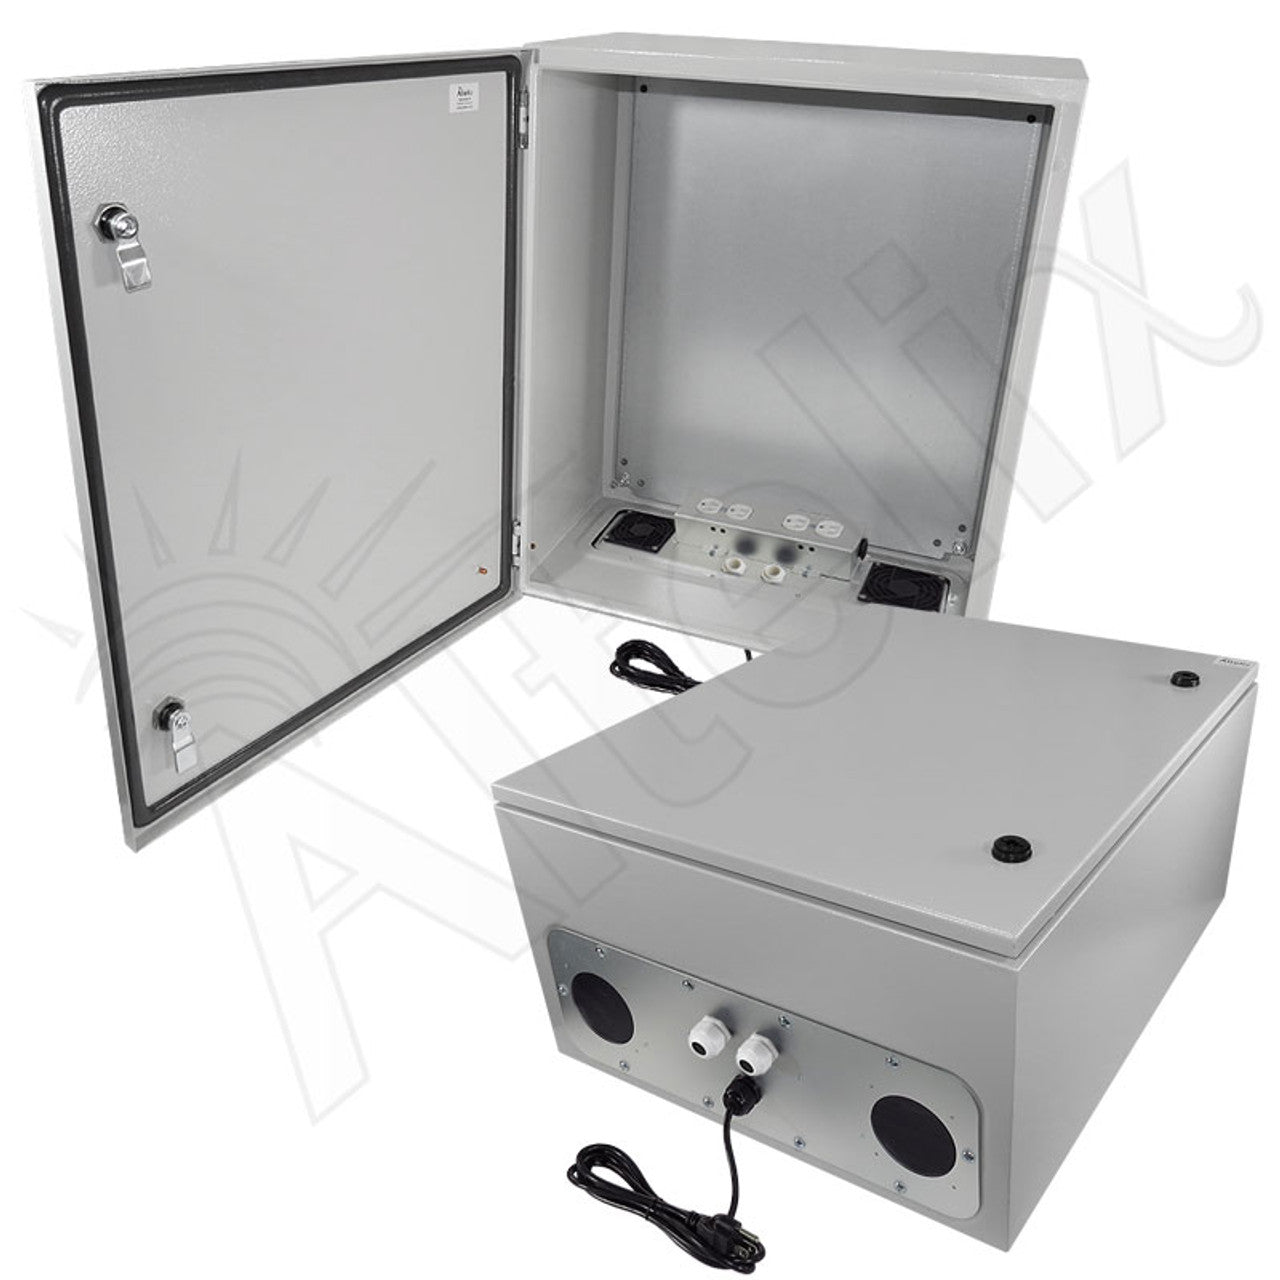 Altelix Steel Weatherproof NEMA Enclosure with Dual 120 VAC Duplex Outlets and Power Cord